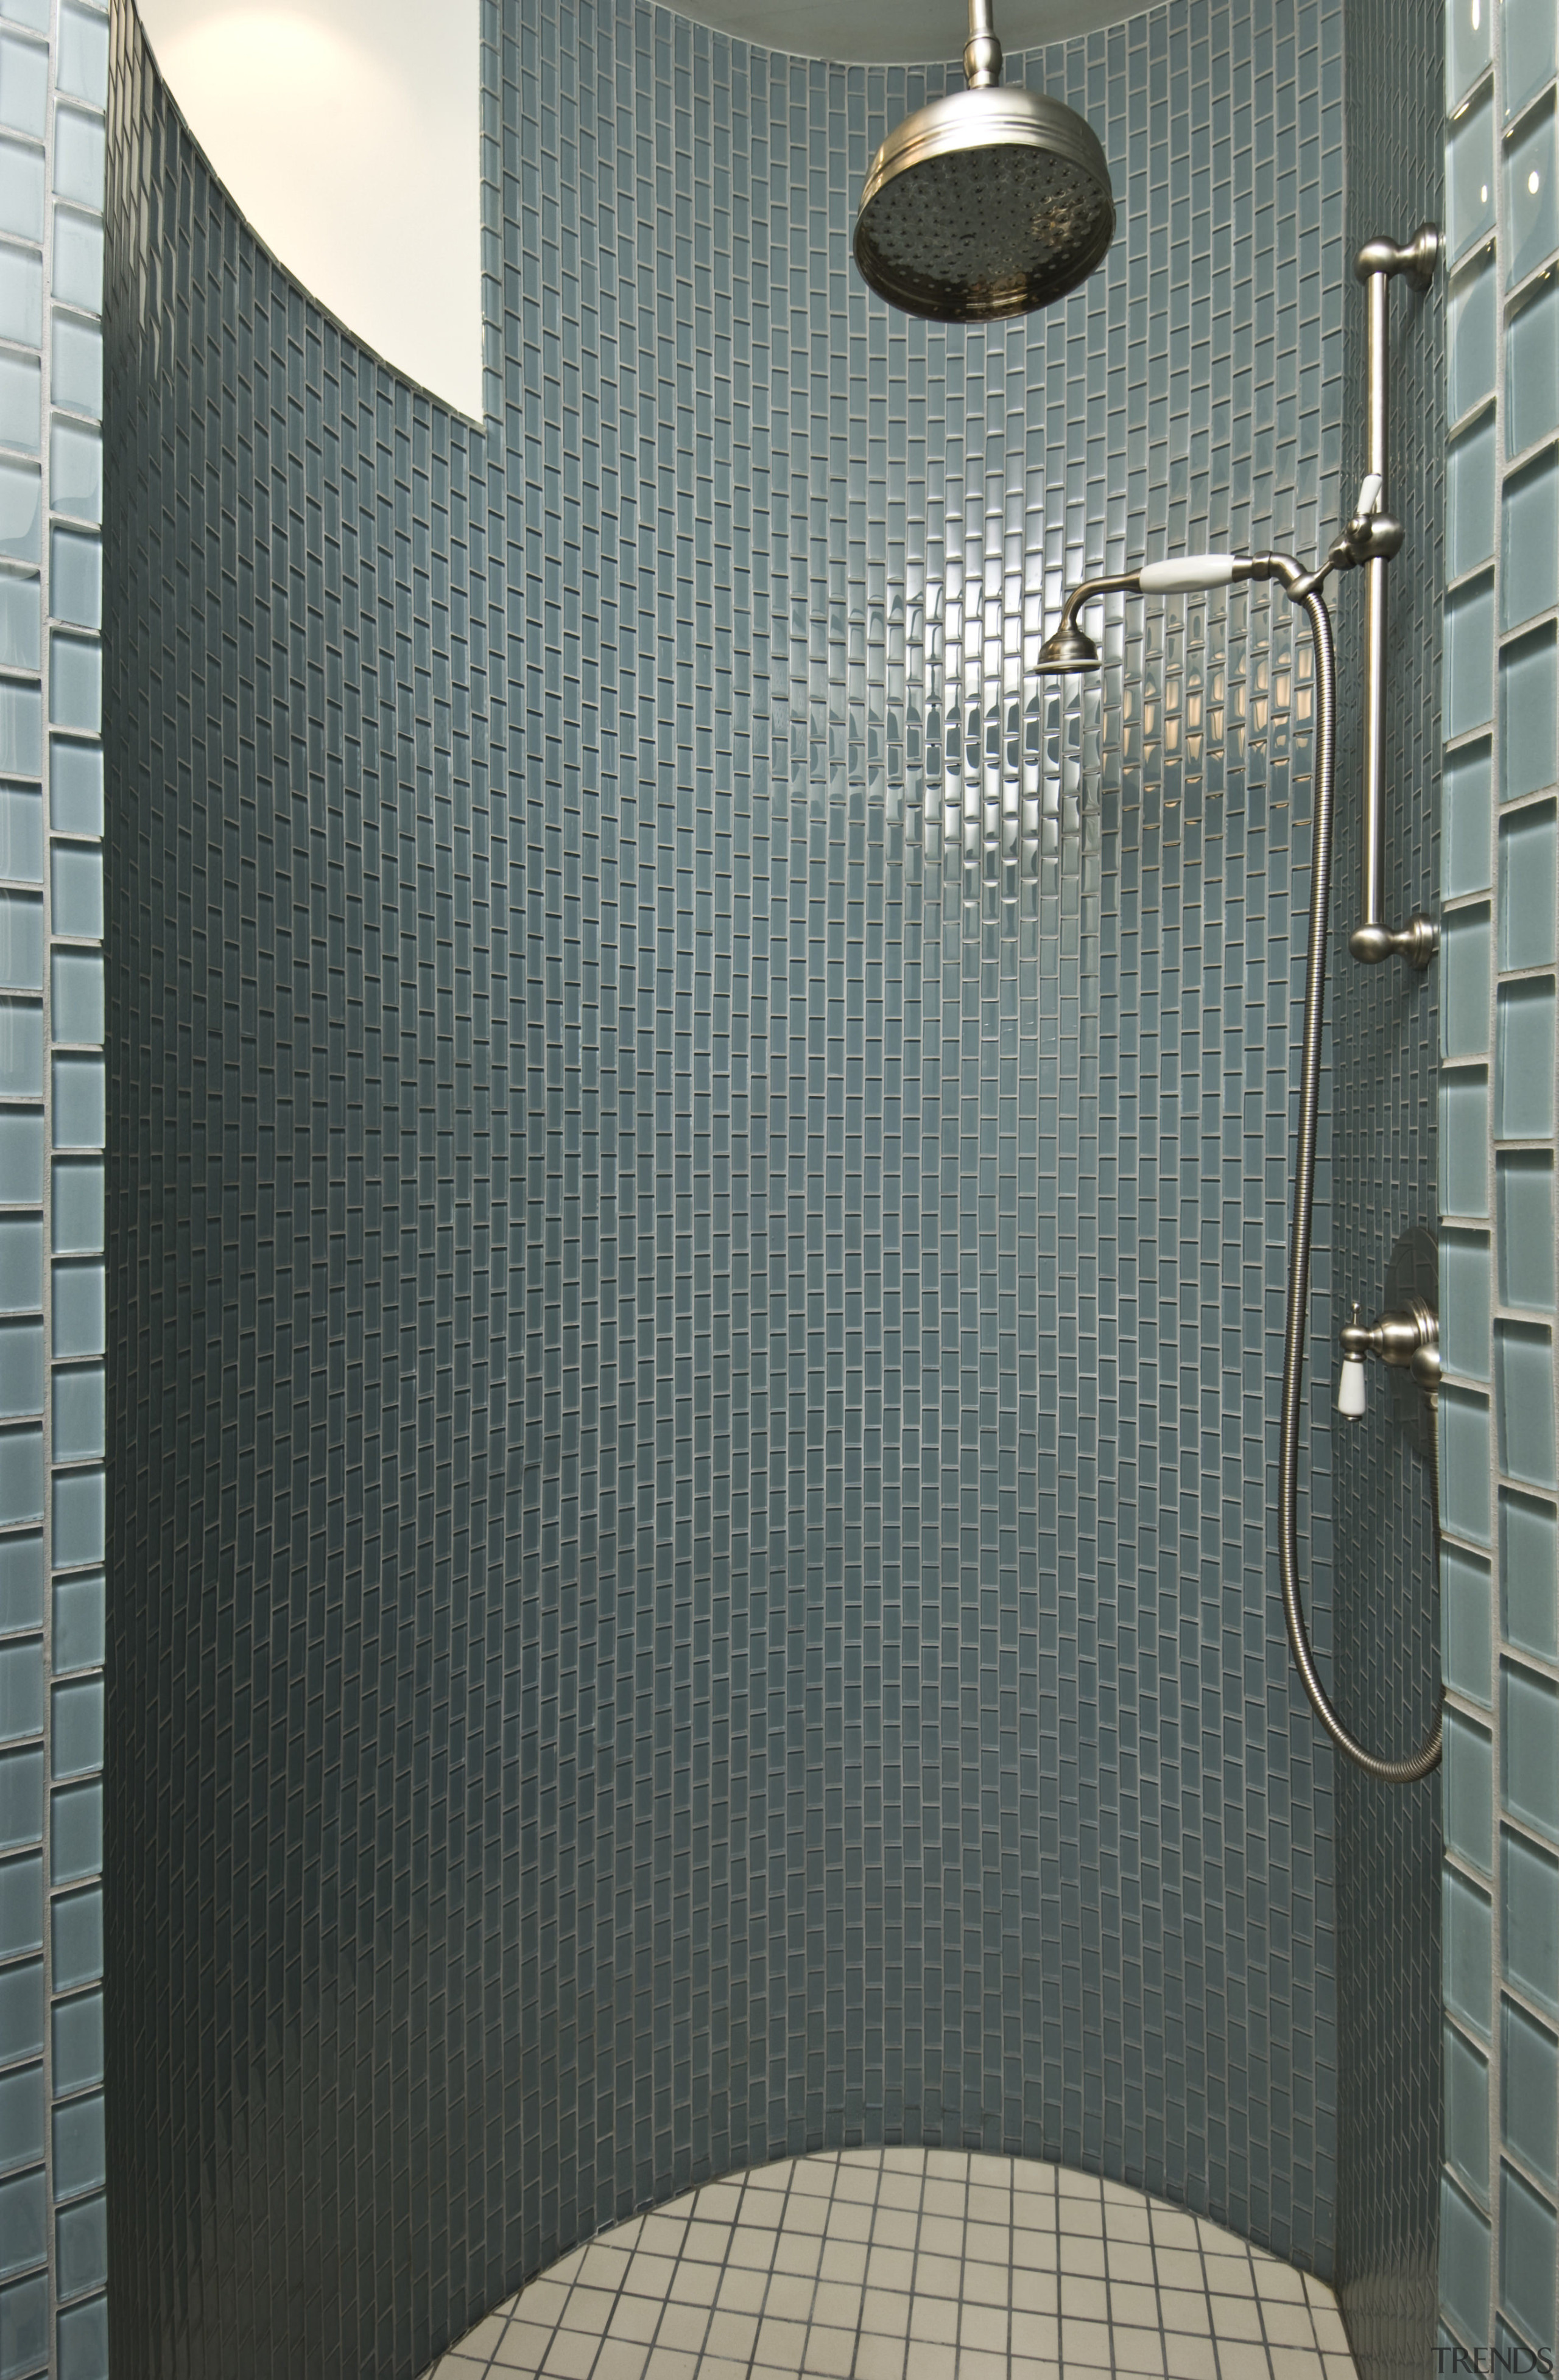 View of shower enclosure which features tiling, shower bathroom, plumbing fixture, room, shower, tile, gray, black